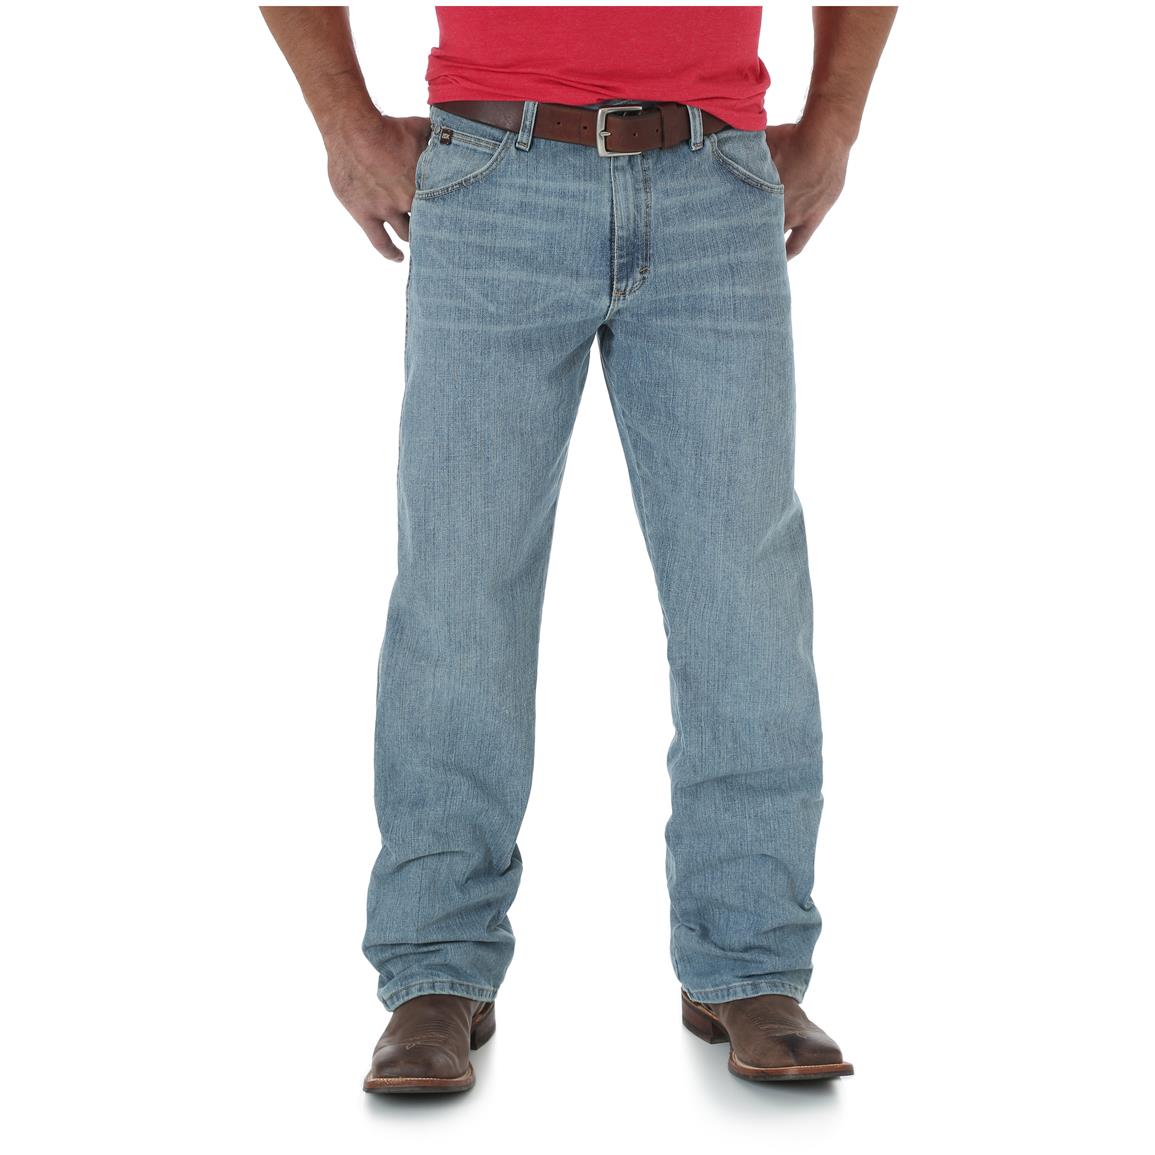 Wrangler 20X No. 23 Men's Relaxed Fit Jeans - 672650, Jeans & Pants at ...